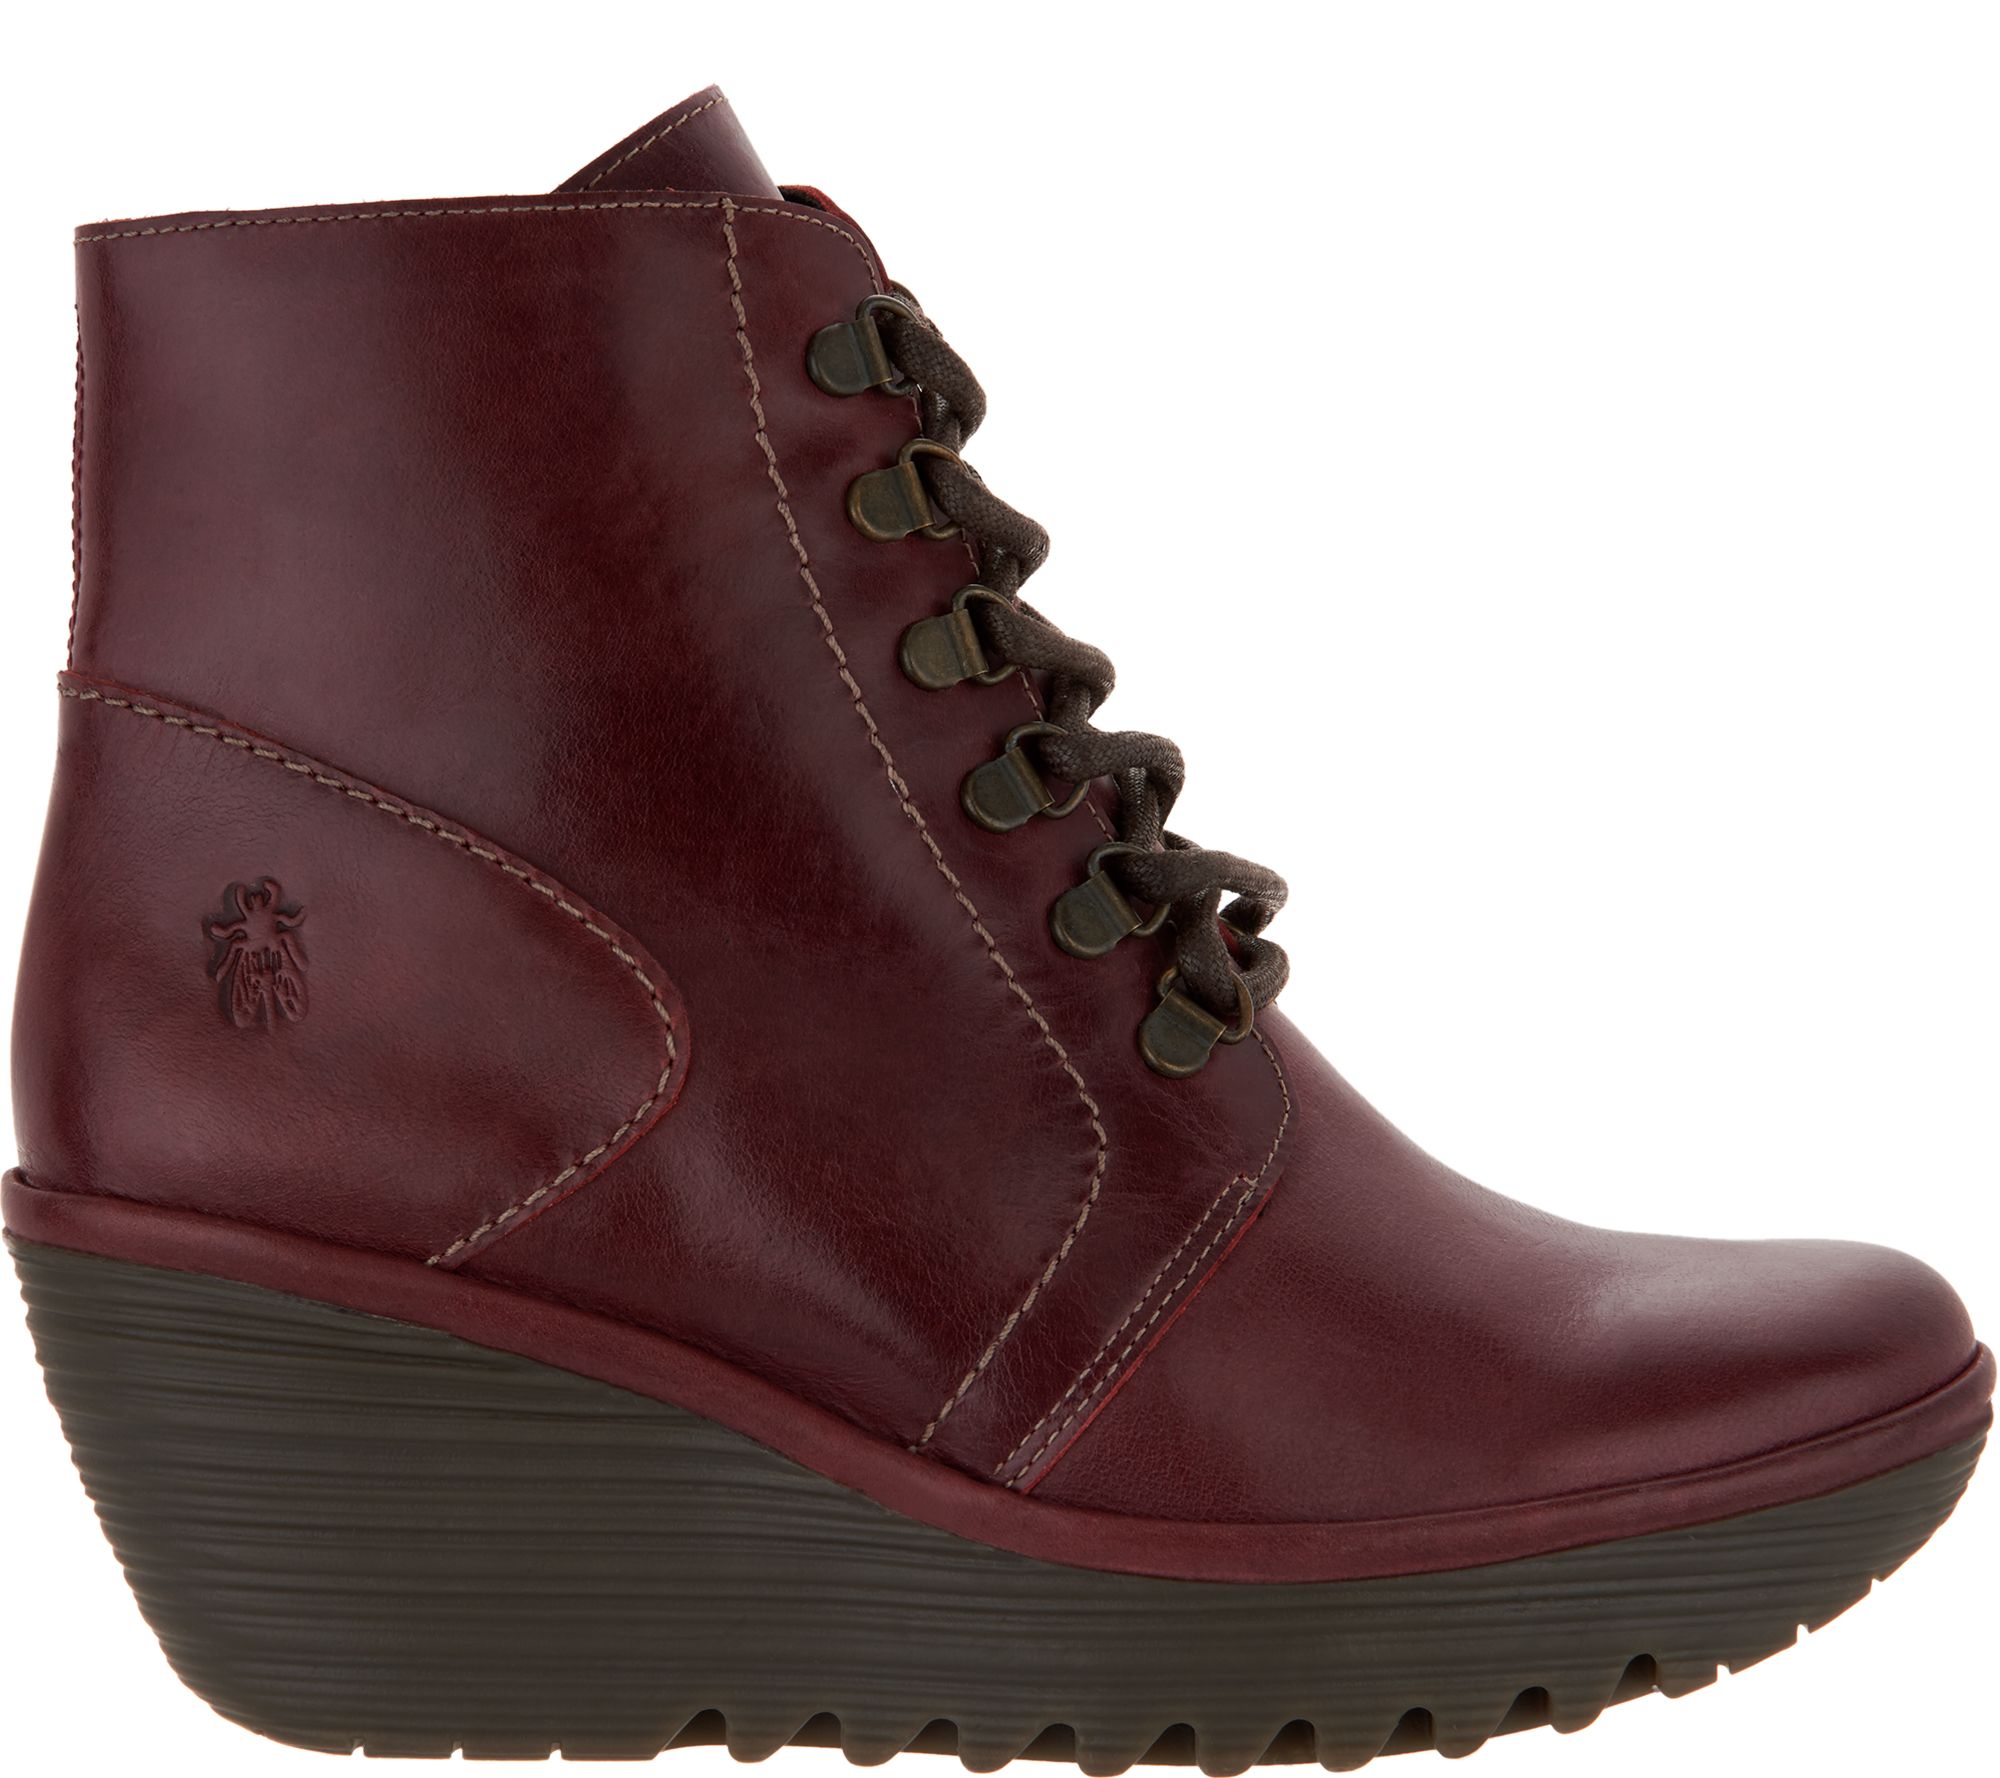 FLY London Leather Lace-up Wedge Ankle Boots - Yarn - QVC.com